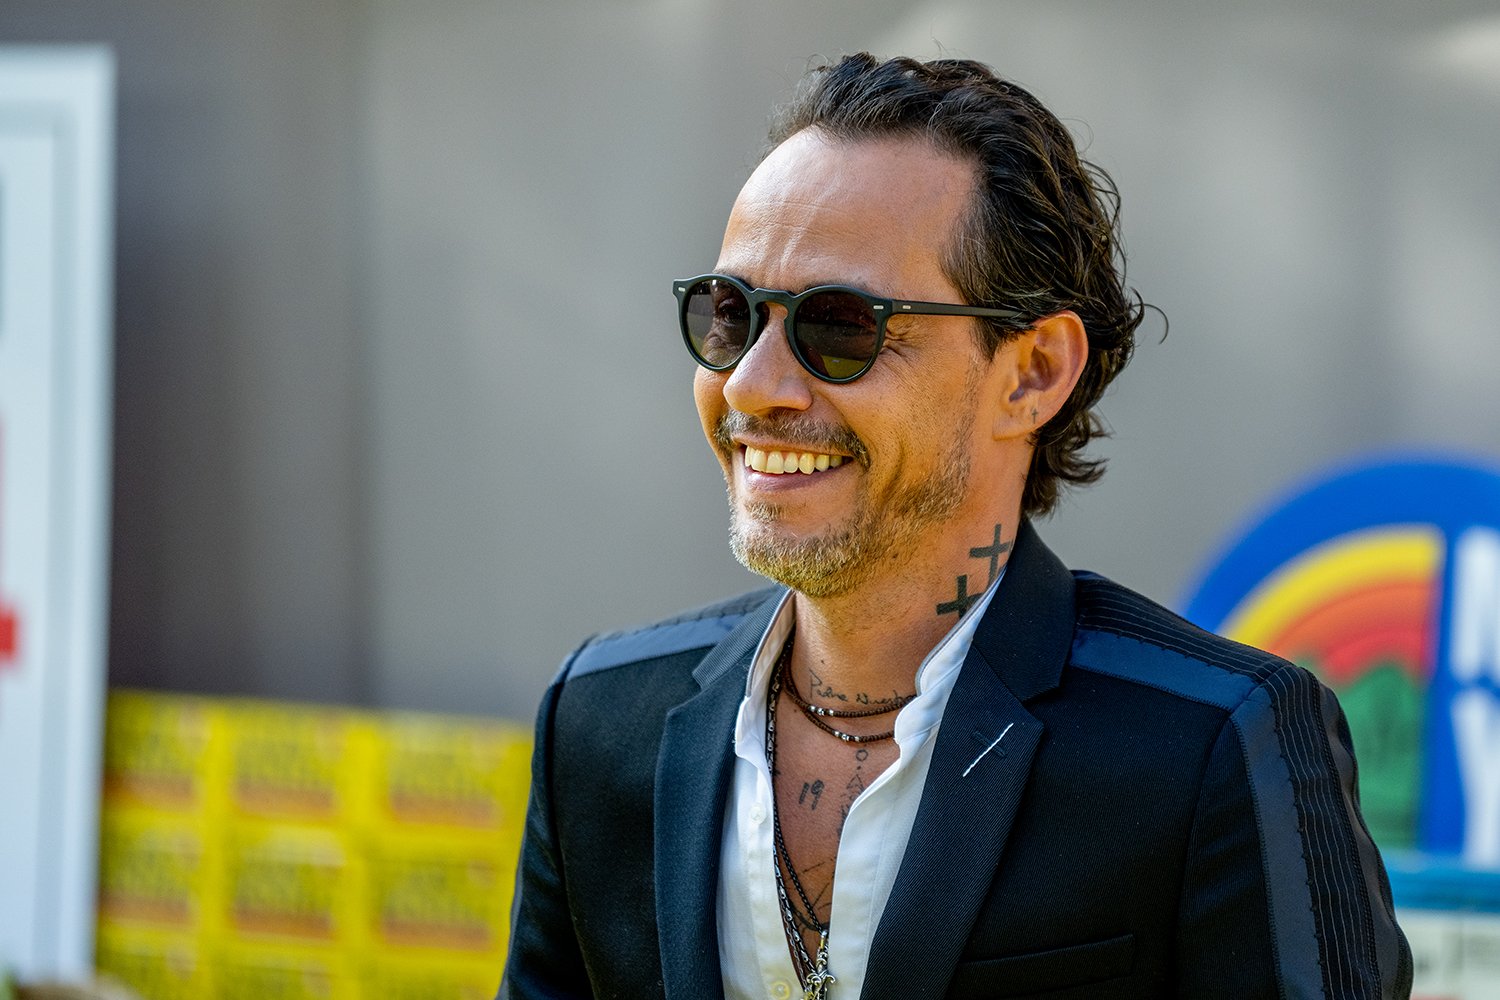 Marc Anthony at the 'In the Heights' premiere